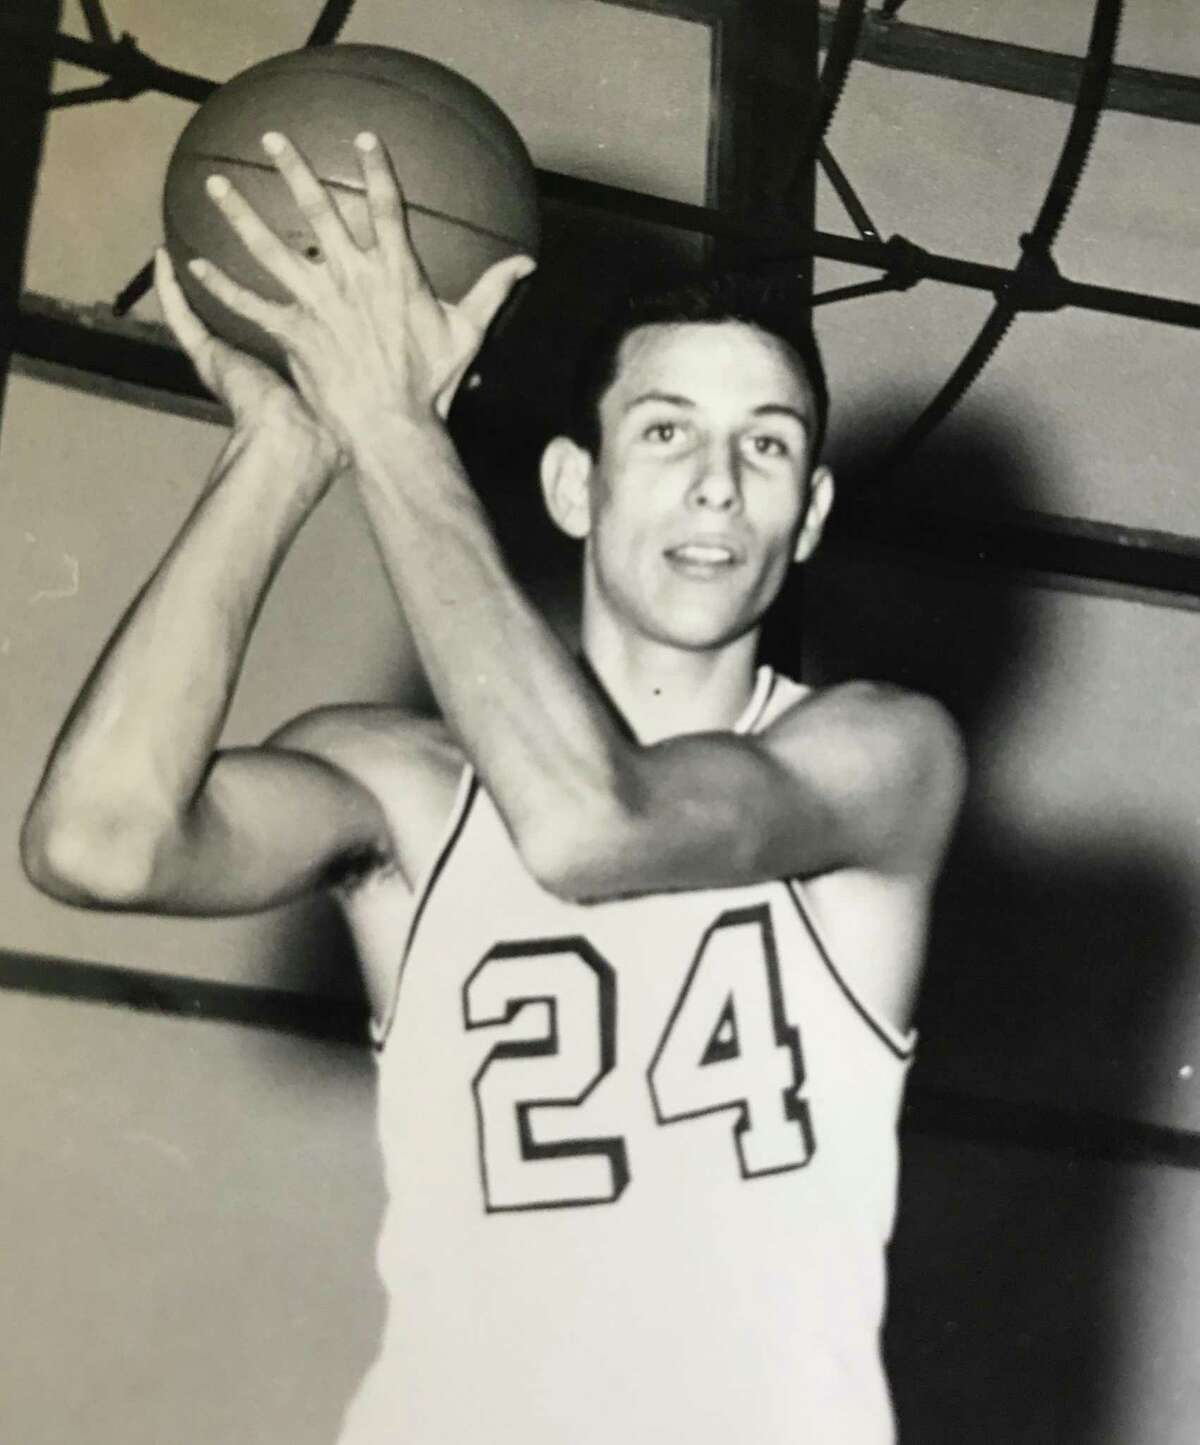 Bennie Lenox starred at Clear Creek High School before enjoying a banner career at Texas A&M, where he scored a Southwest Conference record 53 points in one game.